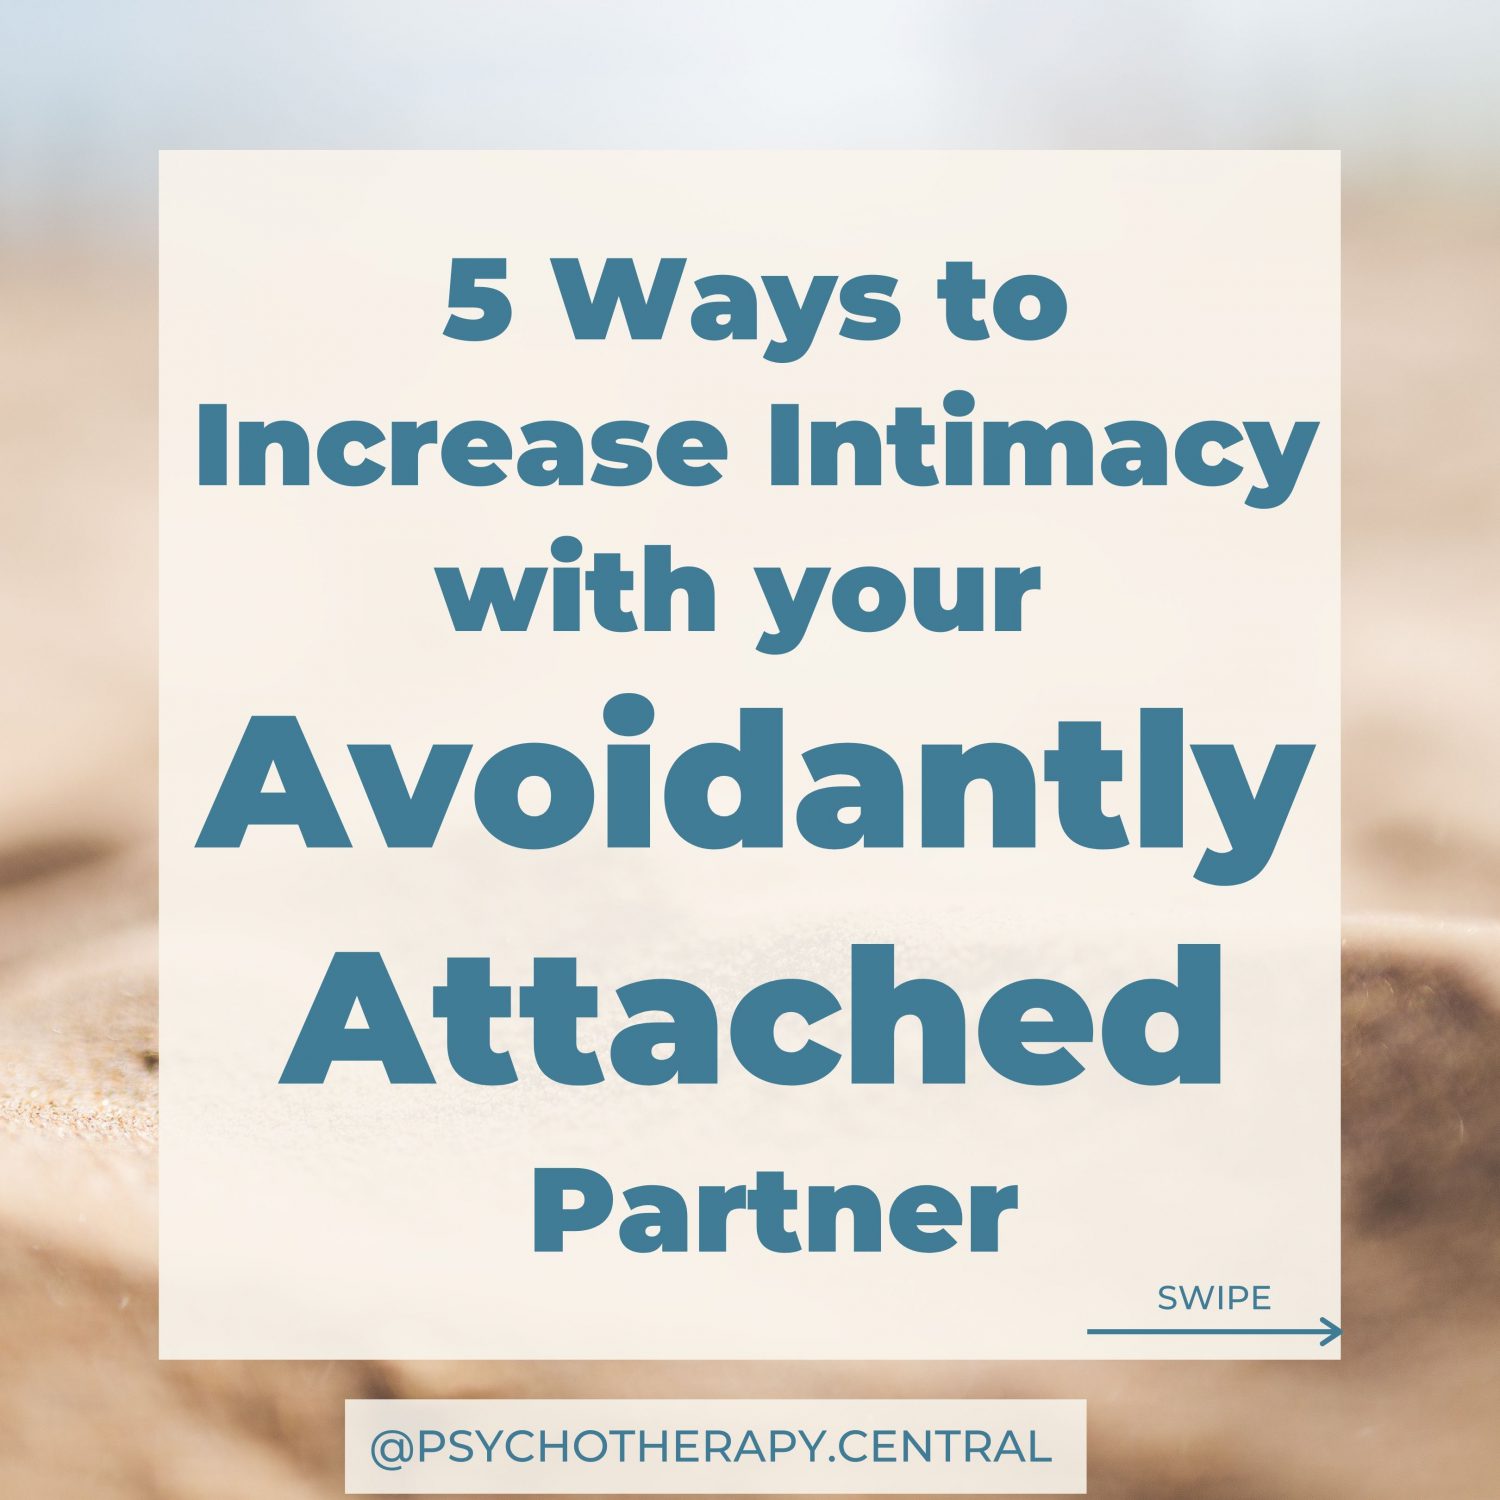 5 Ways to Increase Intimacy with your Avoidantly Attached Partner